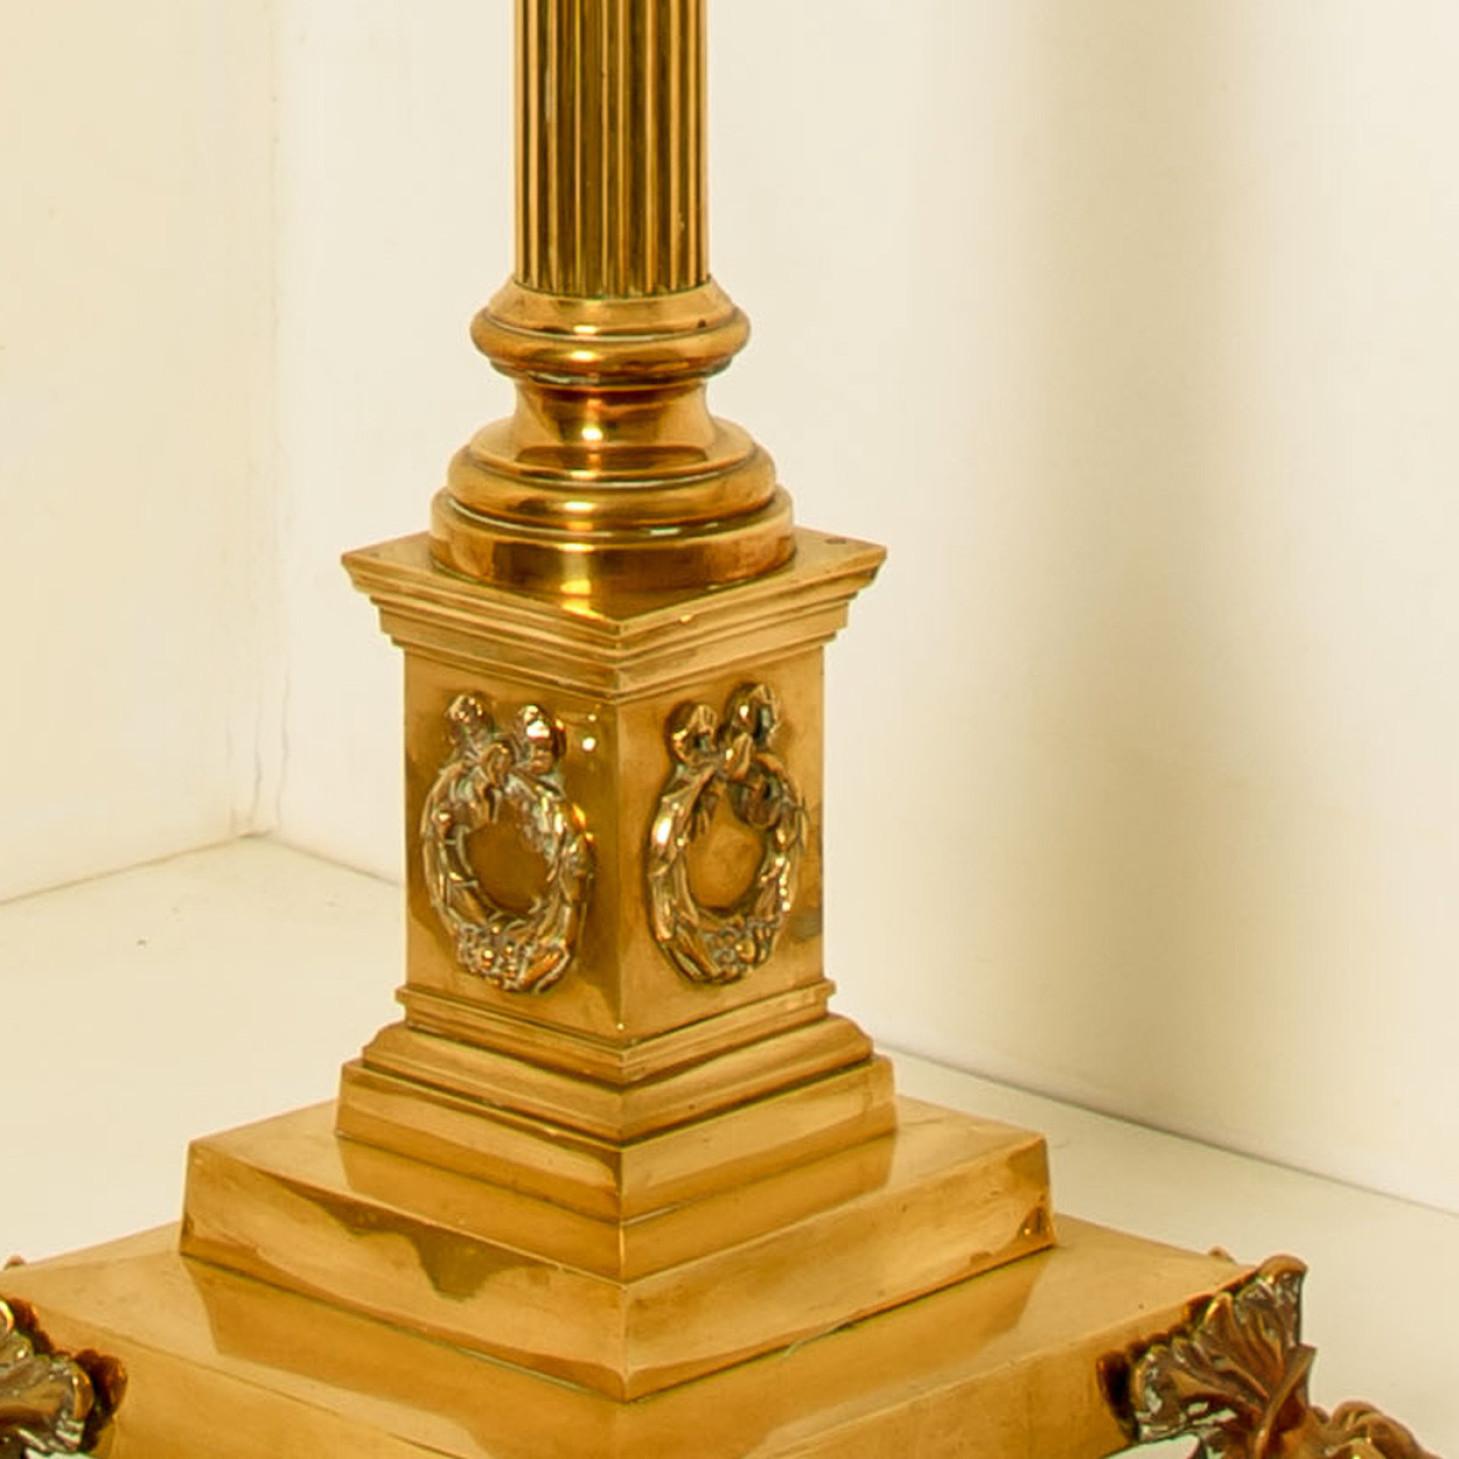 English Antique Corinthian Column Brass Floor Lamp with Fringed Lampshade, England, 1890